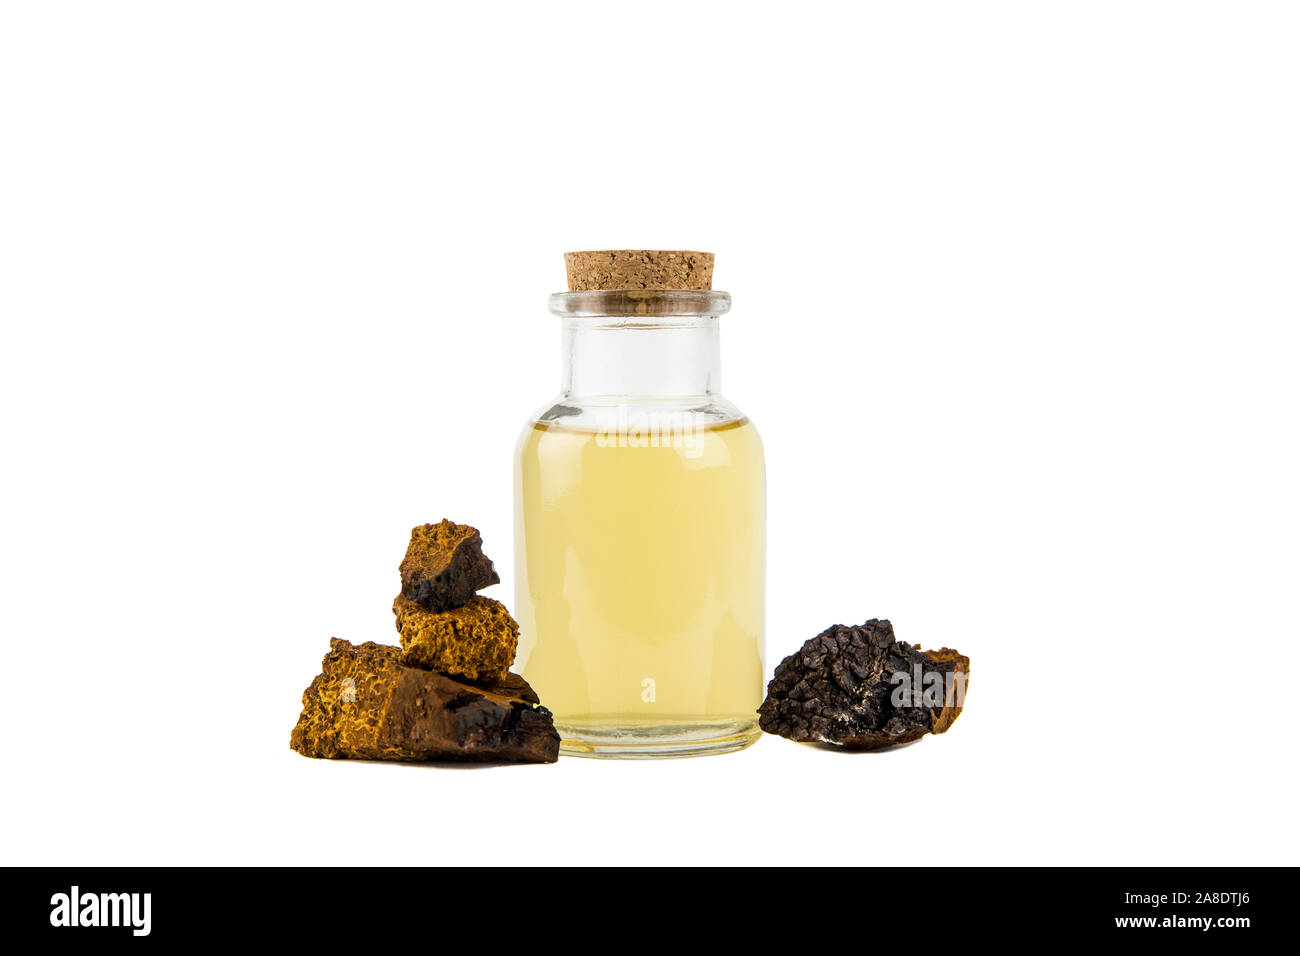 Pure wild natural chaga, Inonotus obliquus mushroom pieces and filtered mushroom mixture in bottle isolated on white background. Gathered from birch t Stock Photo